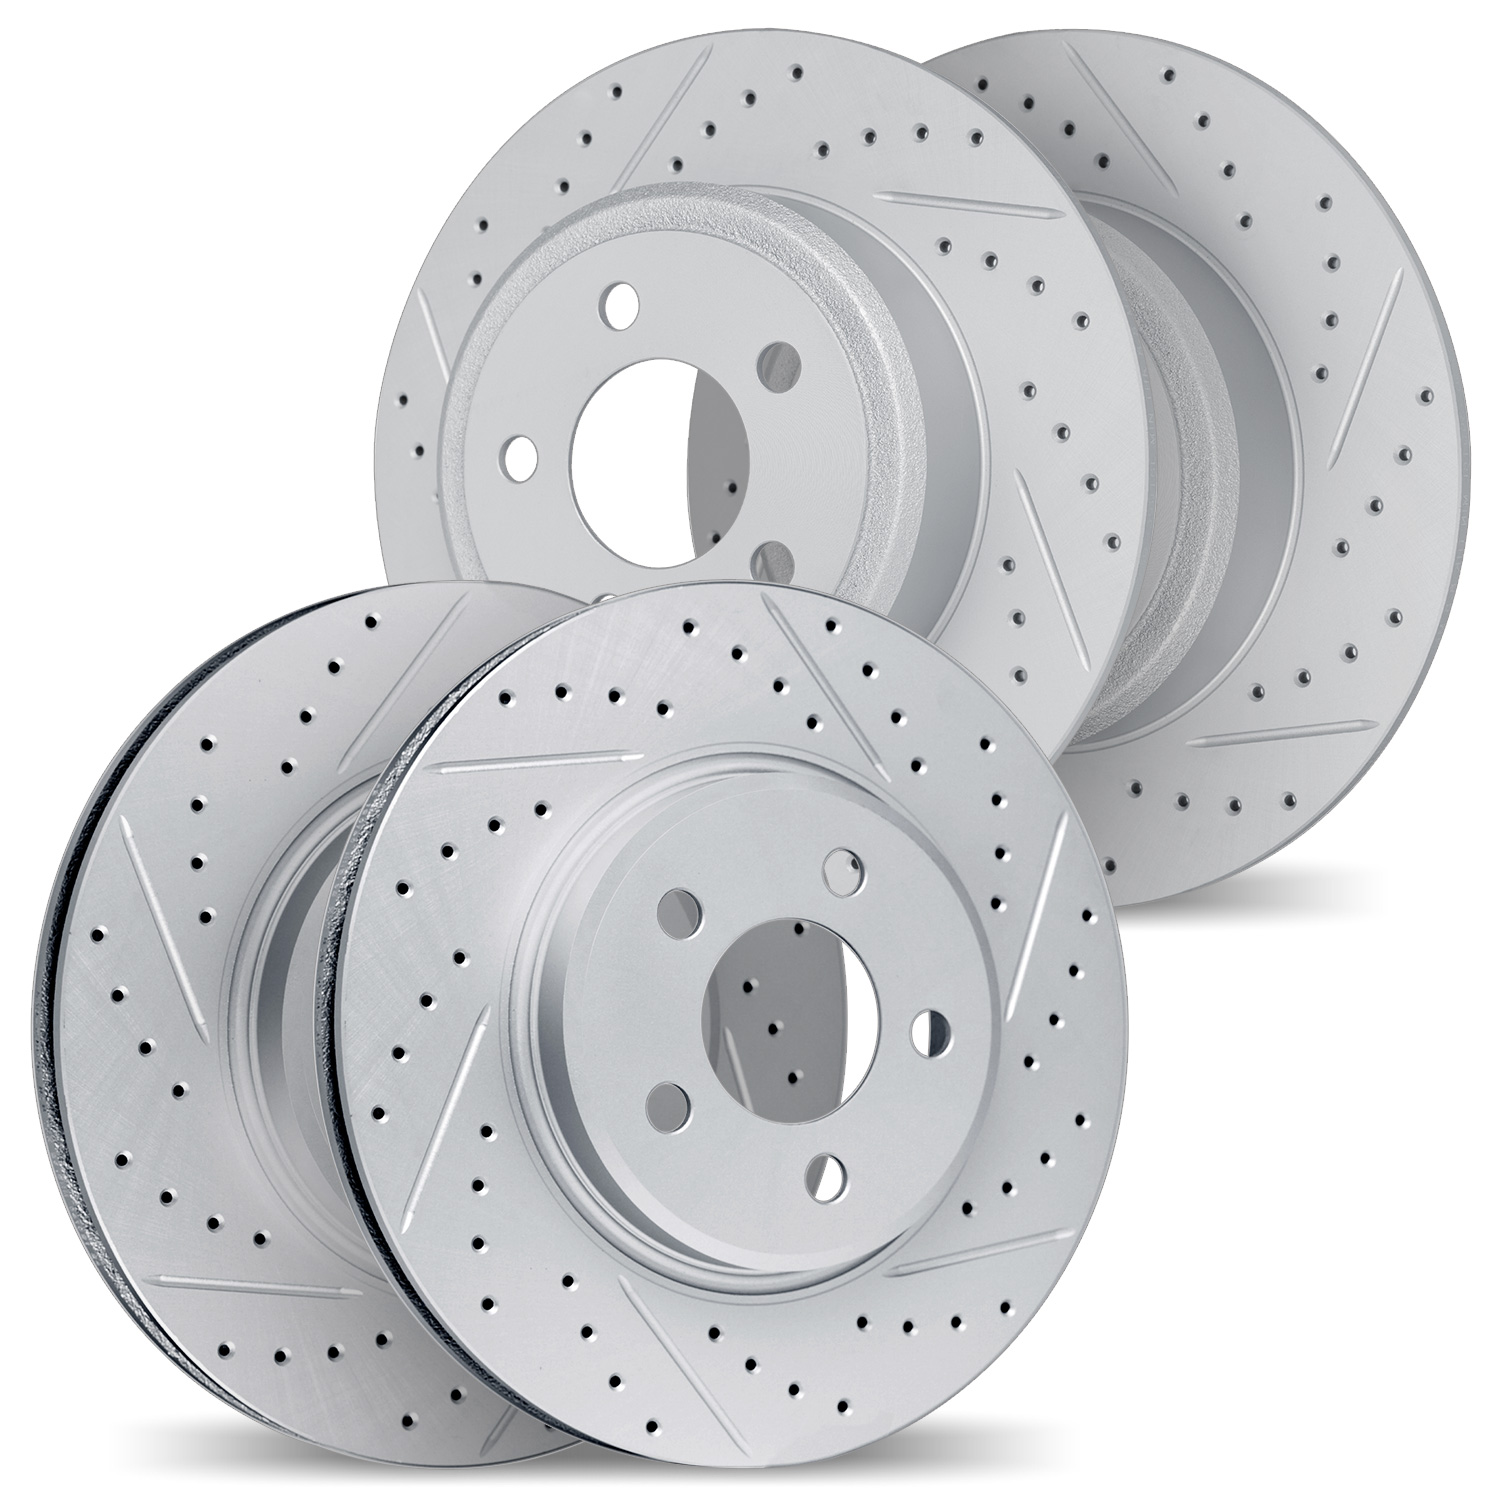 2004-03030 Geoperformance Drilled/Slotted Brake Rotors, Fits Select Kia/Hyundai/Genesis, Position: Front and Rear